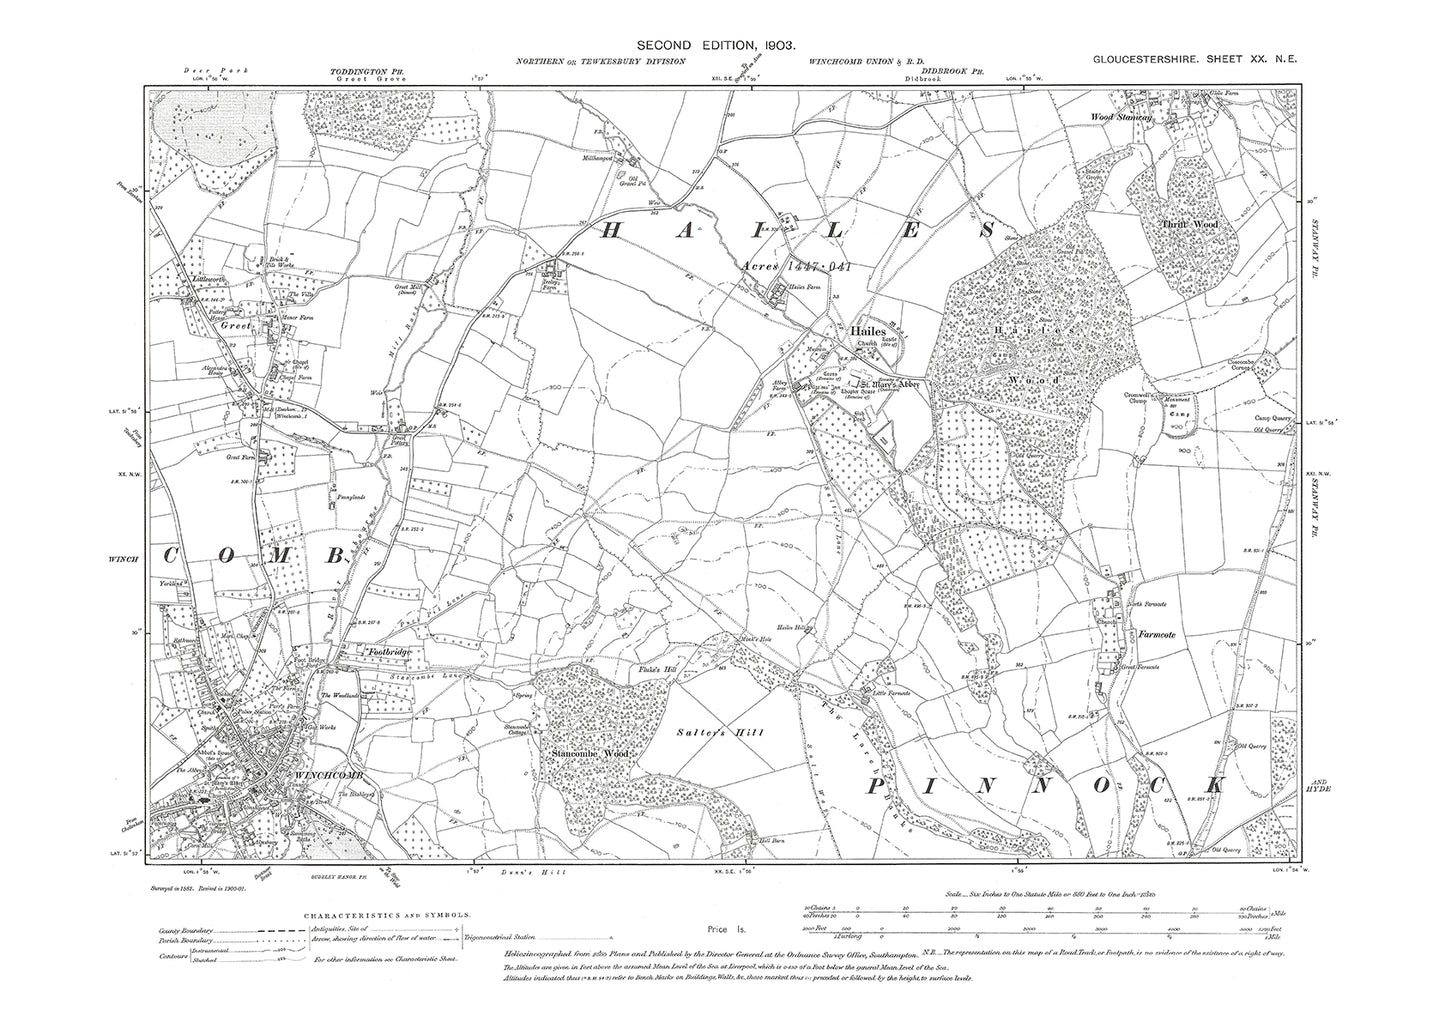 Old OS map dated 1903, showing Winchcomb, Hailes, Greet in Gloucestershire - 20NE